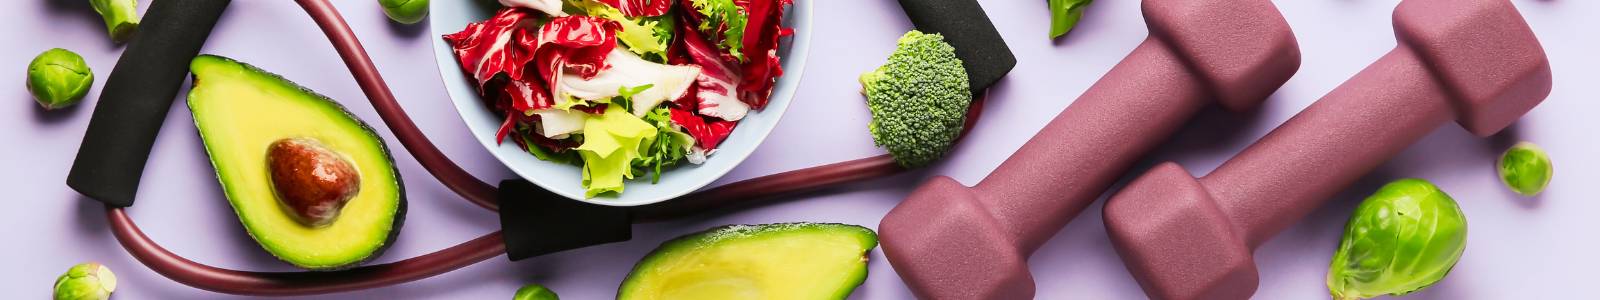 Image of a bowl of cabbage and lettuce on a table with a cut avocado, hand weights, and pieces of broccoli